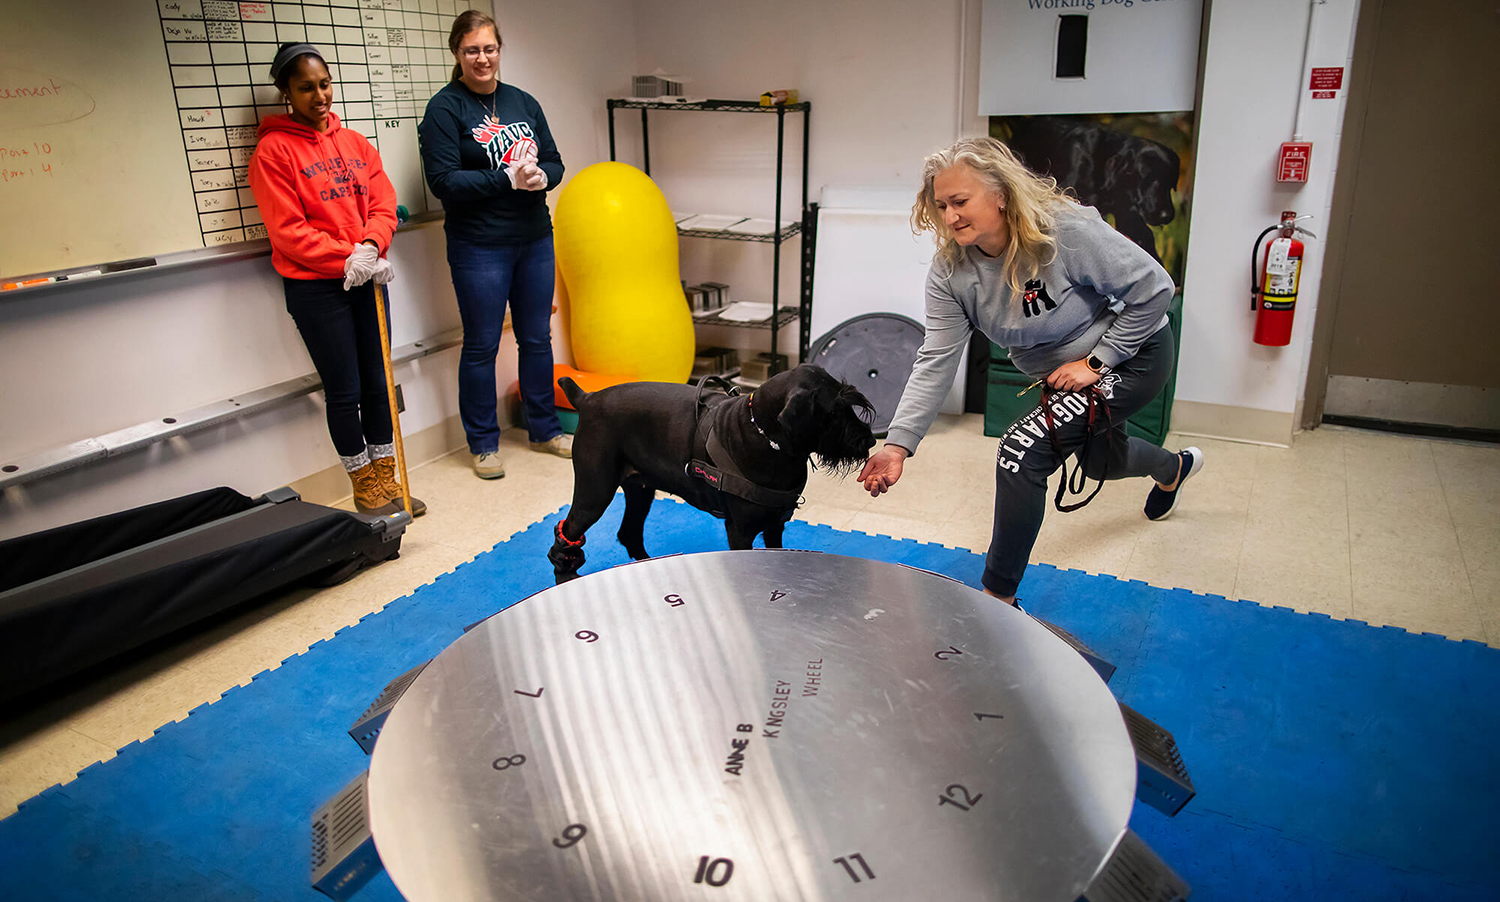 Challah, a giant schnauzer with a gifted nose, receives a treat from owner Anastasia Ayzenberg after a successful search at the scent wheel as instructor Tessa Seales and volunteer Shelby Wise look on.